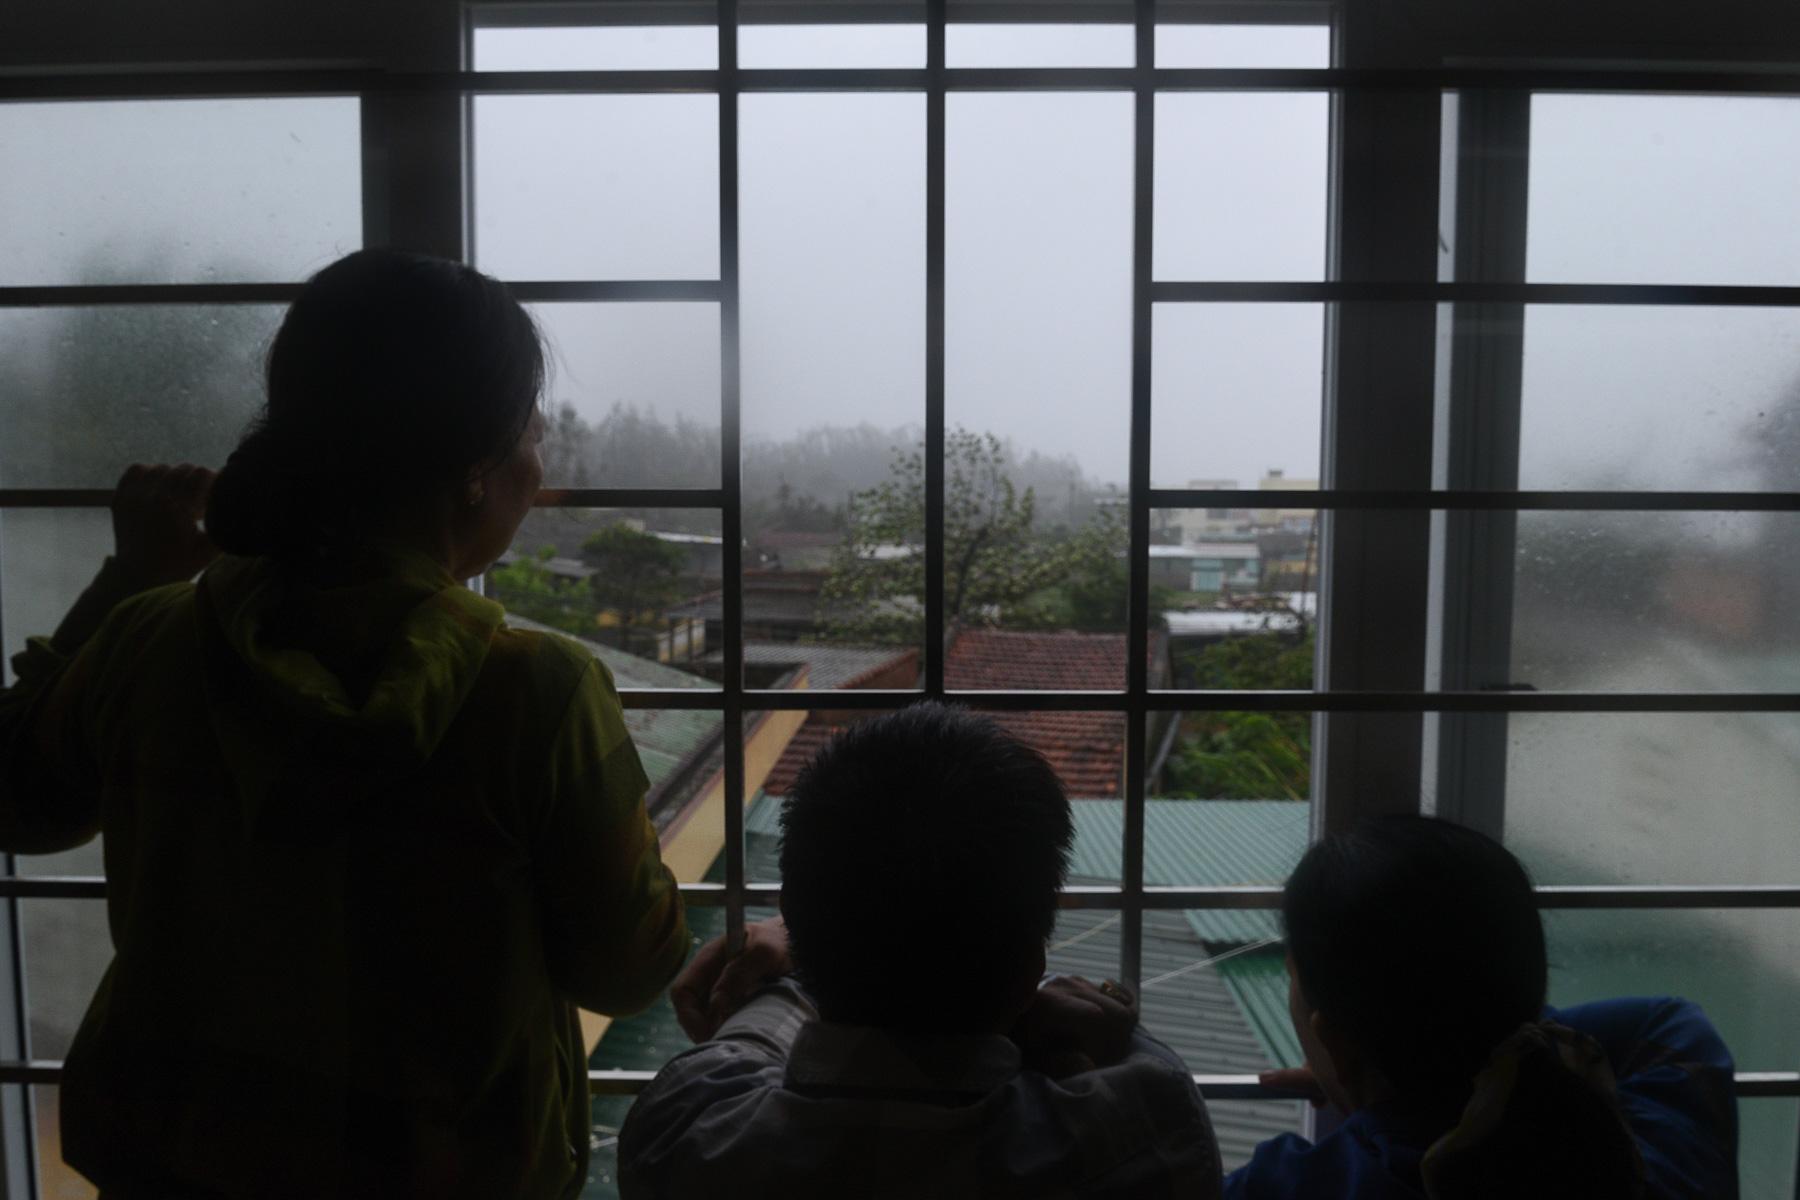 A month with full of sorrow - People look outside from a shelter as Typhoon Molave...